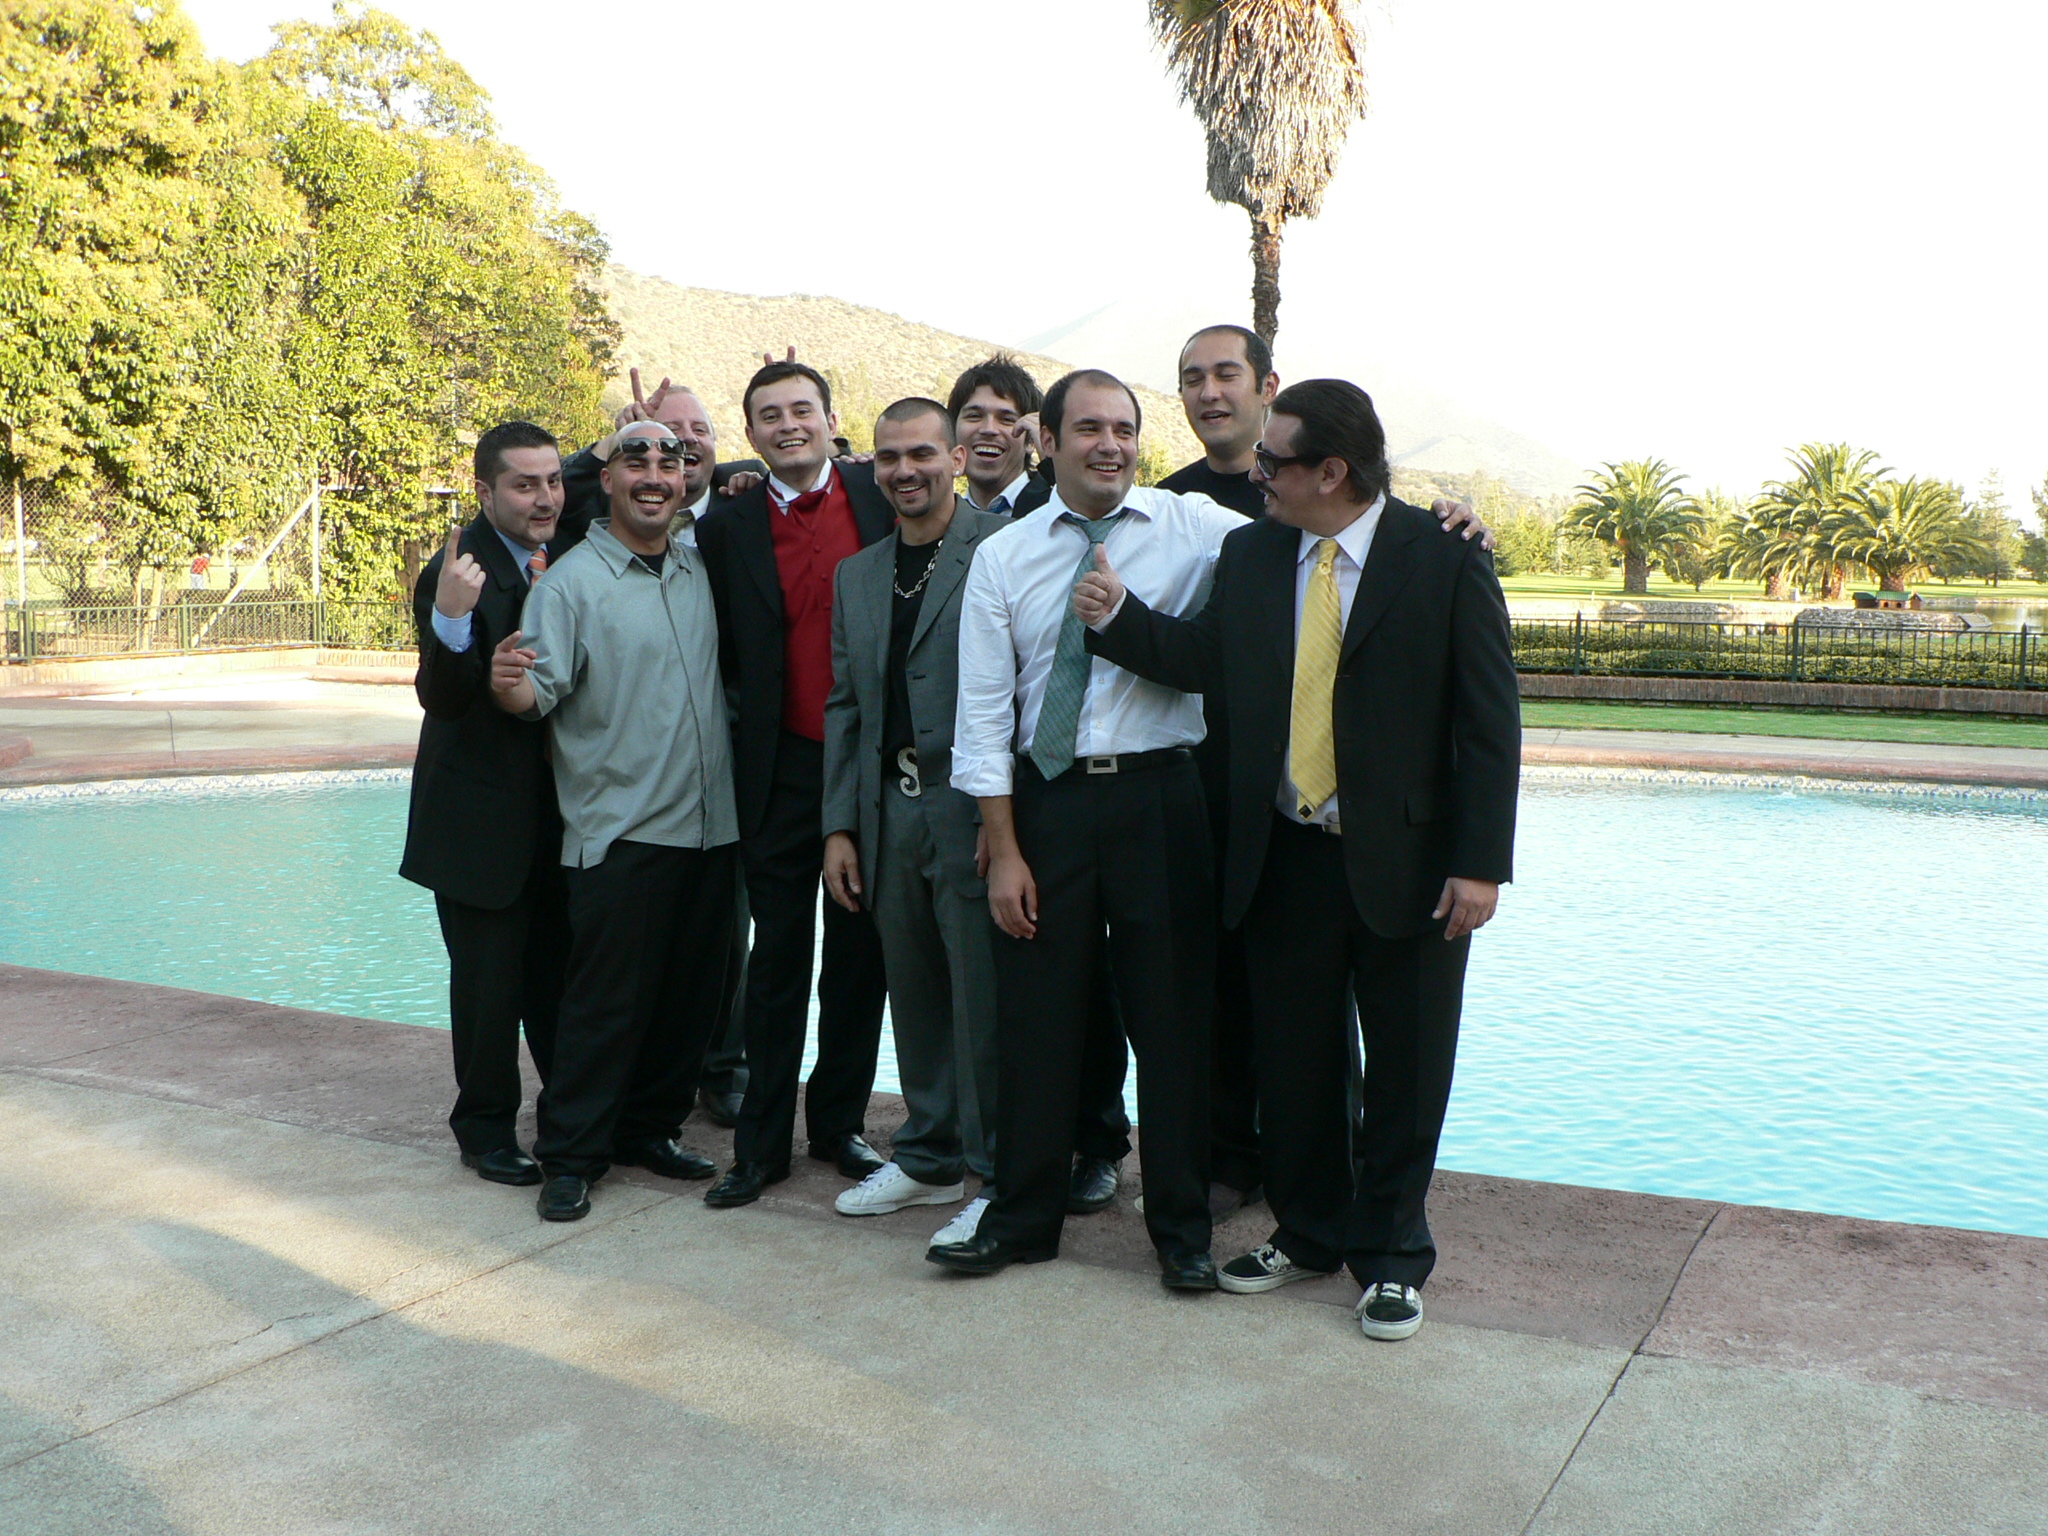 an outdoor group po near the pool for a party